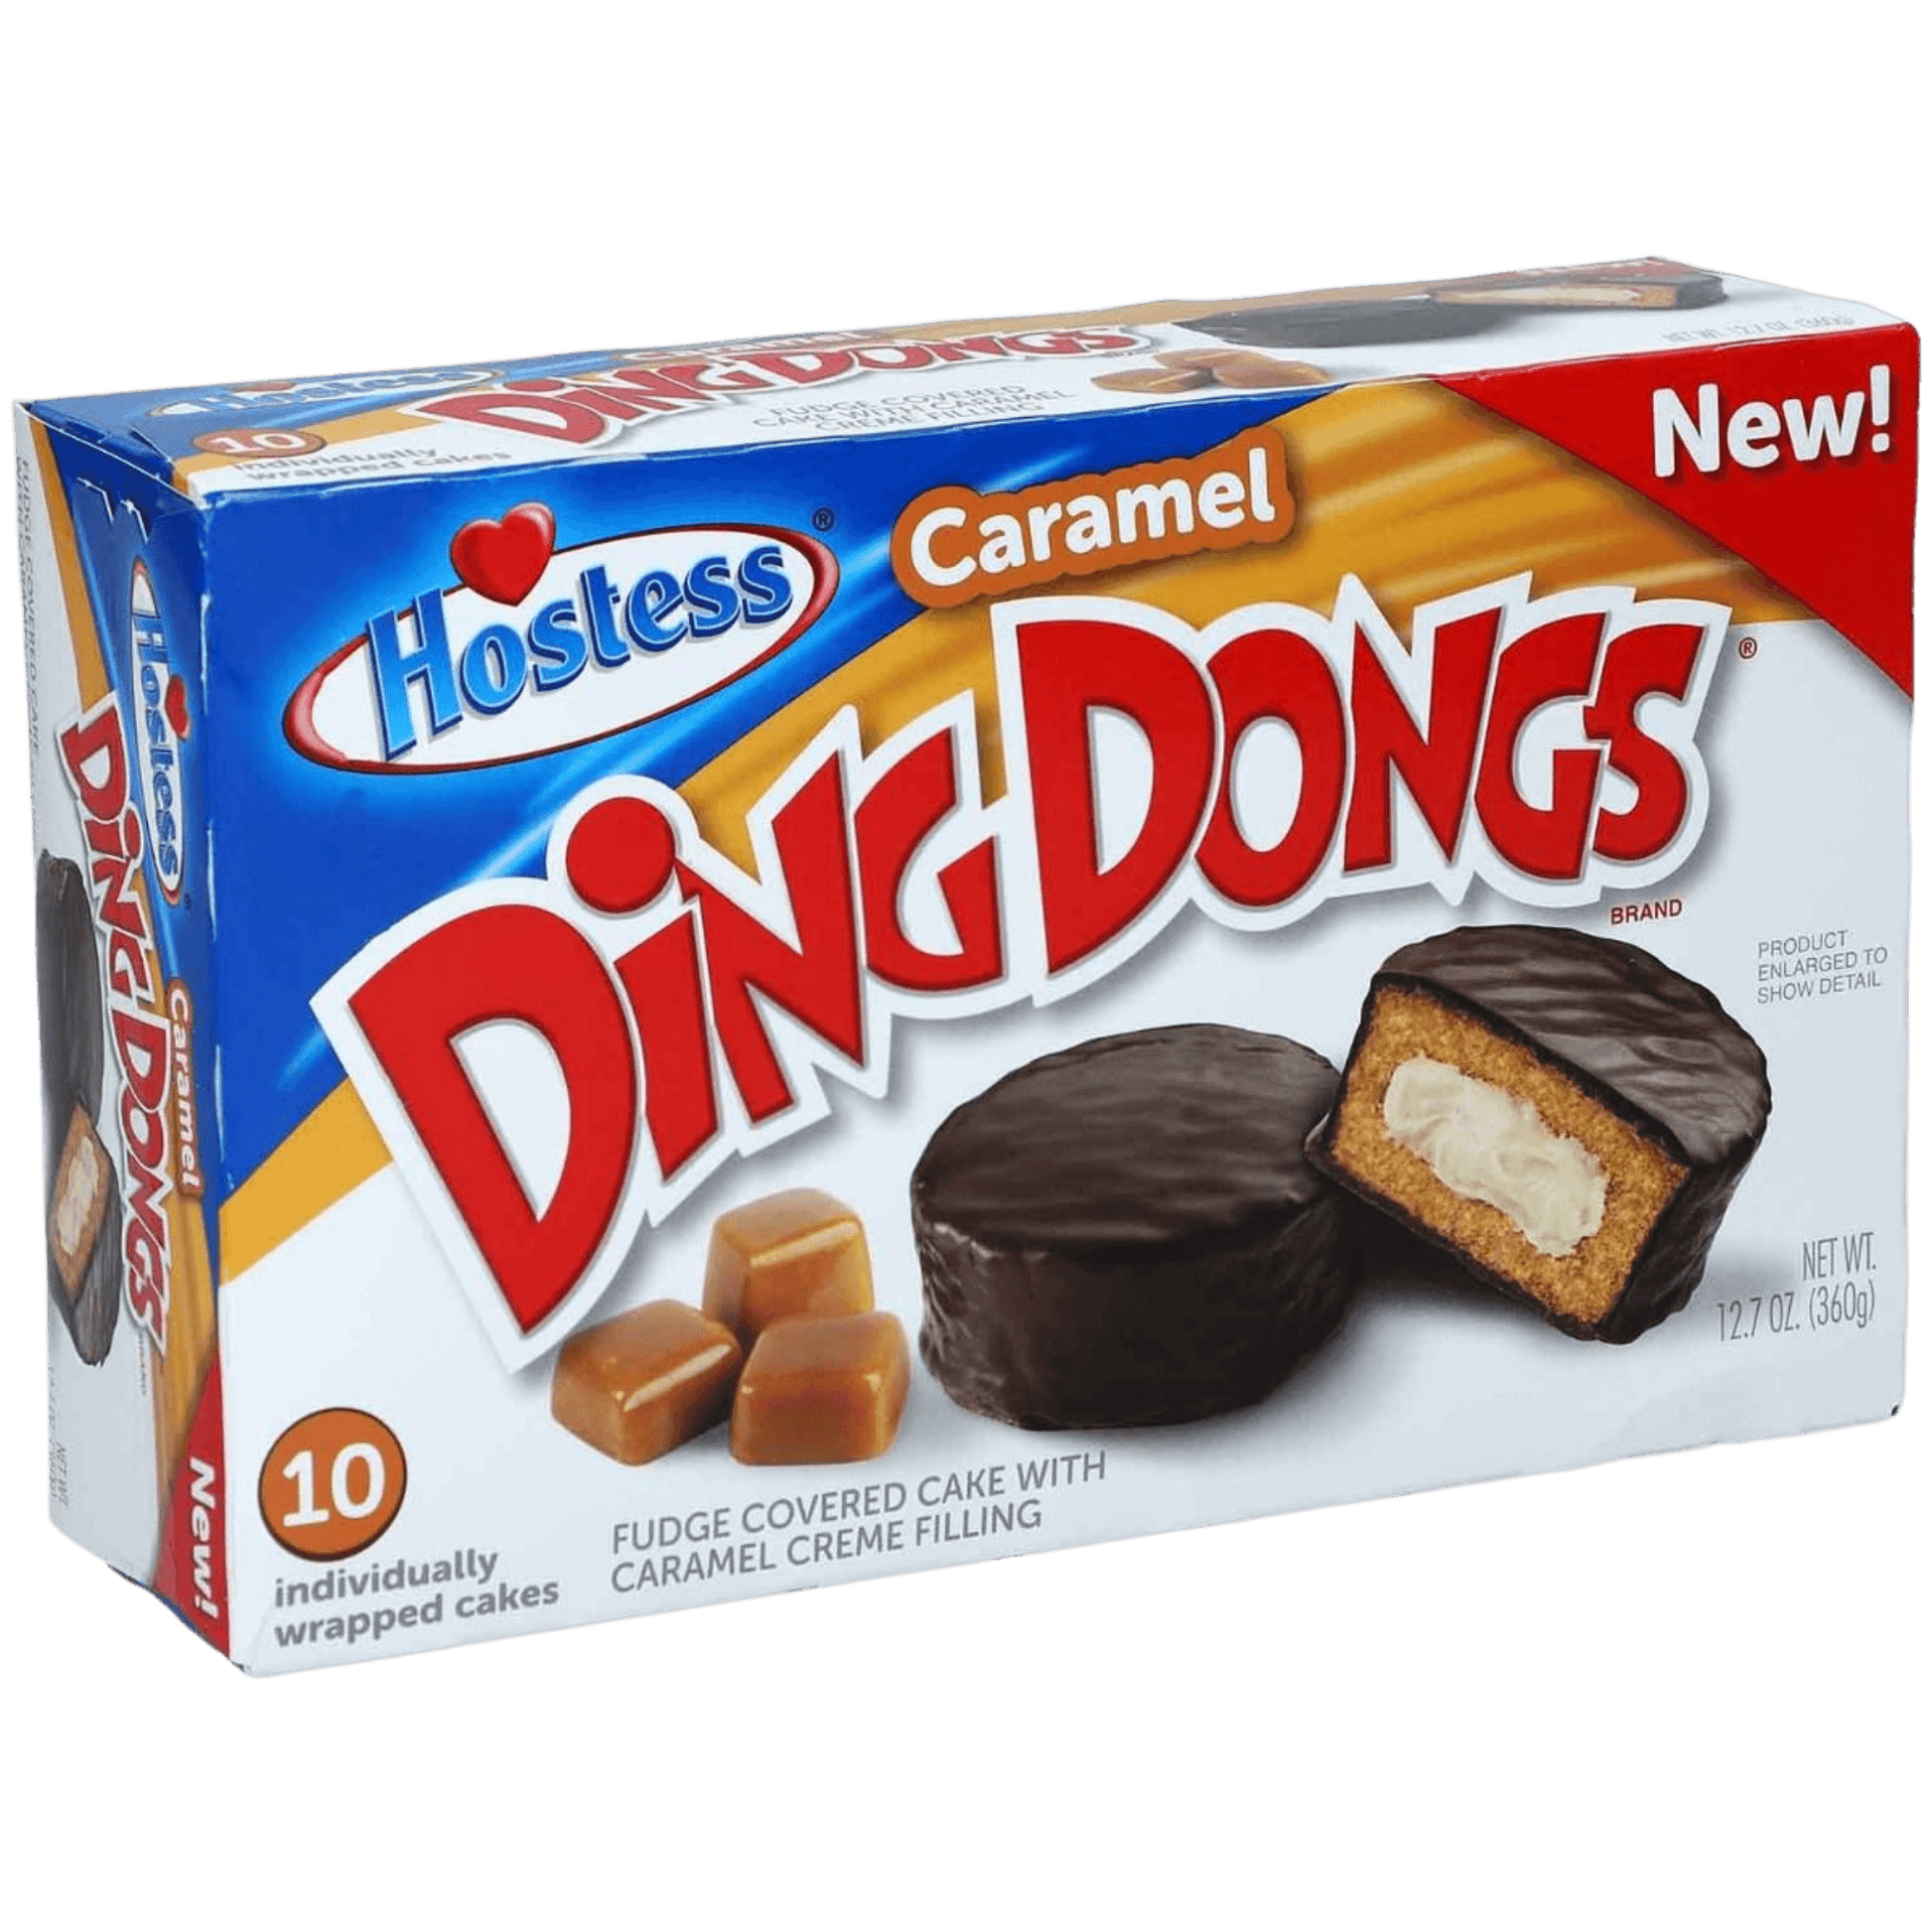 Hostess Caramel Ding Dongs 10 Pack 360g - Snack Cakes - Scran.ie